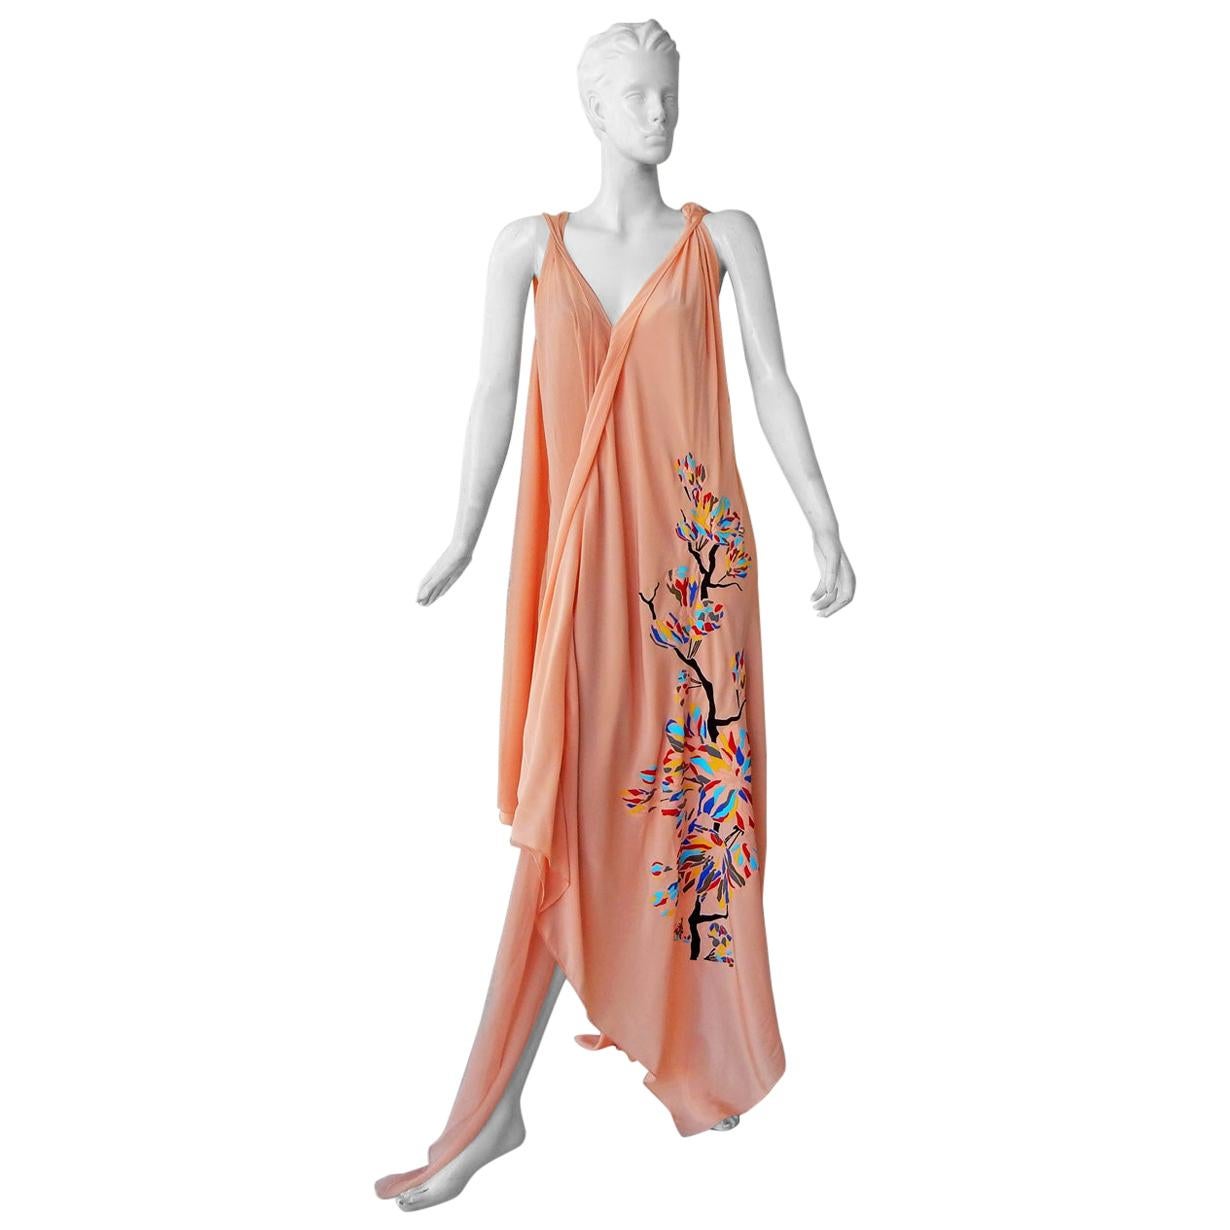 Vionnet "Dahlia" Flowing Silk Chiffon Embroidered Runway Caftan Dress Gown For Sale